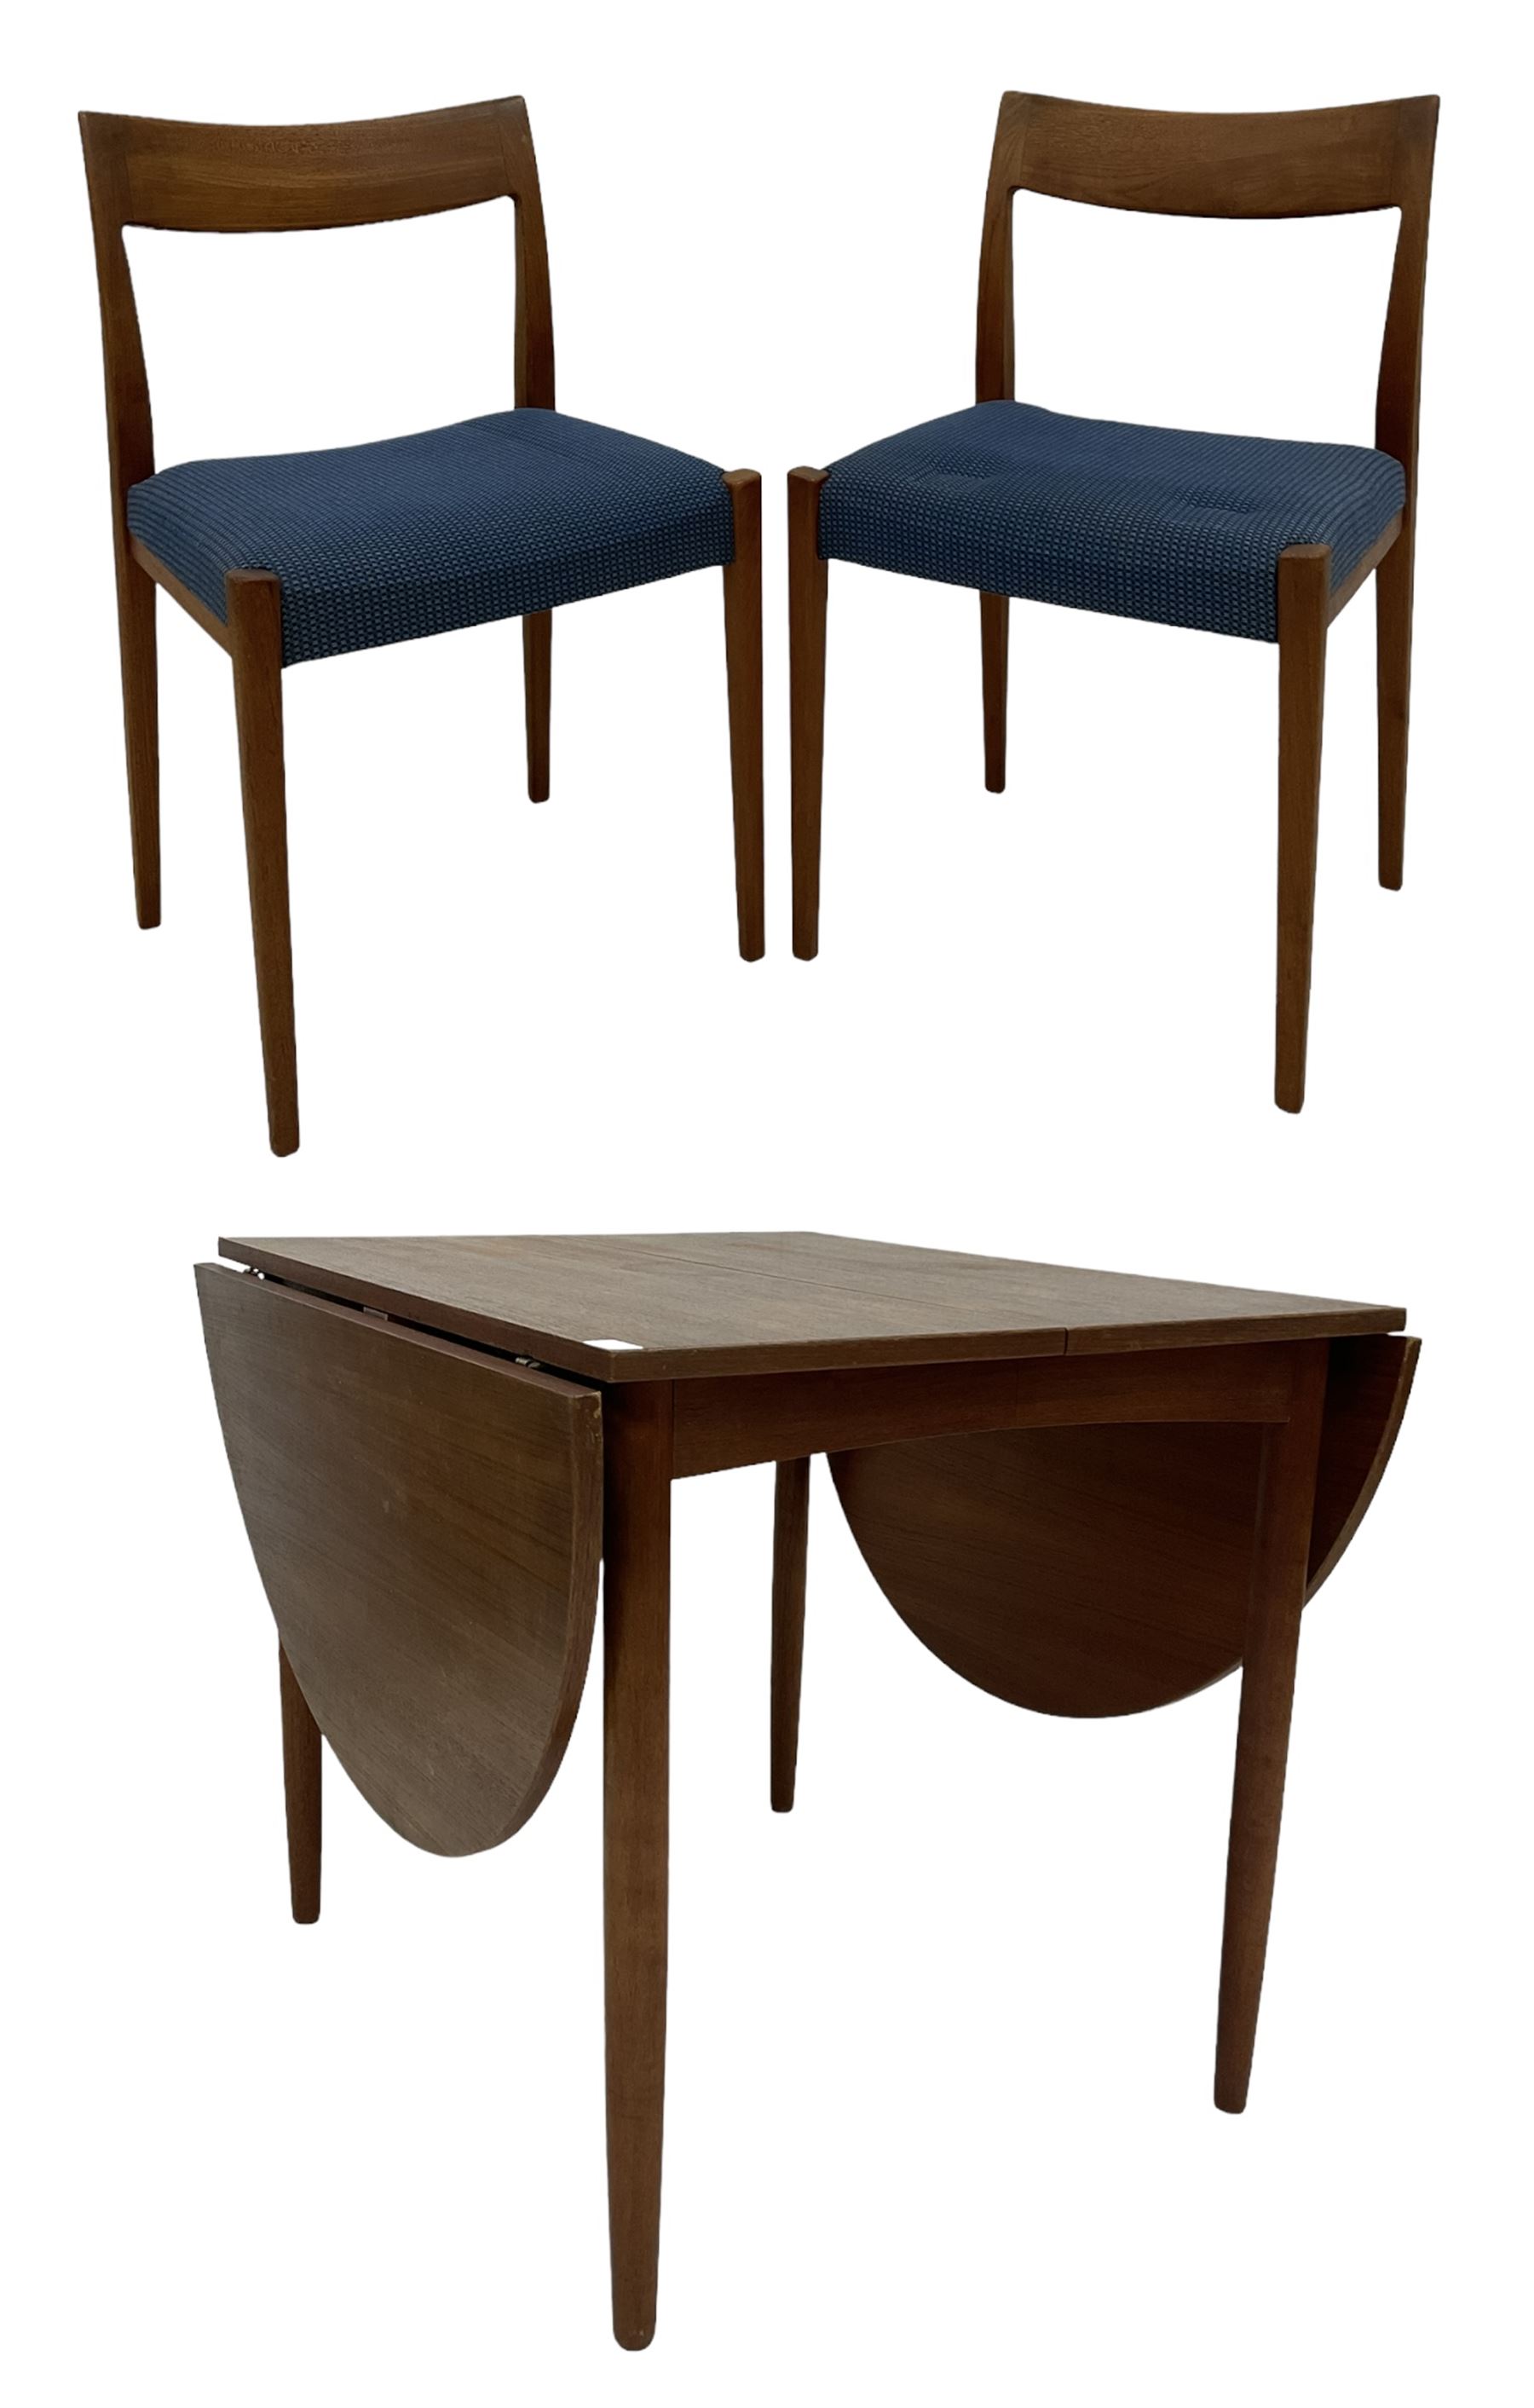 Nils Jonsson for Troeds - Pair of 20th century teak chairs by with upholstered seats